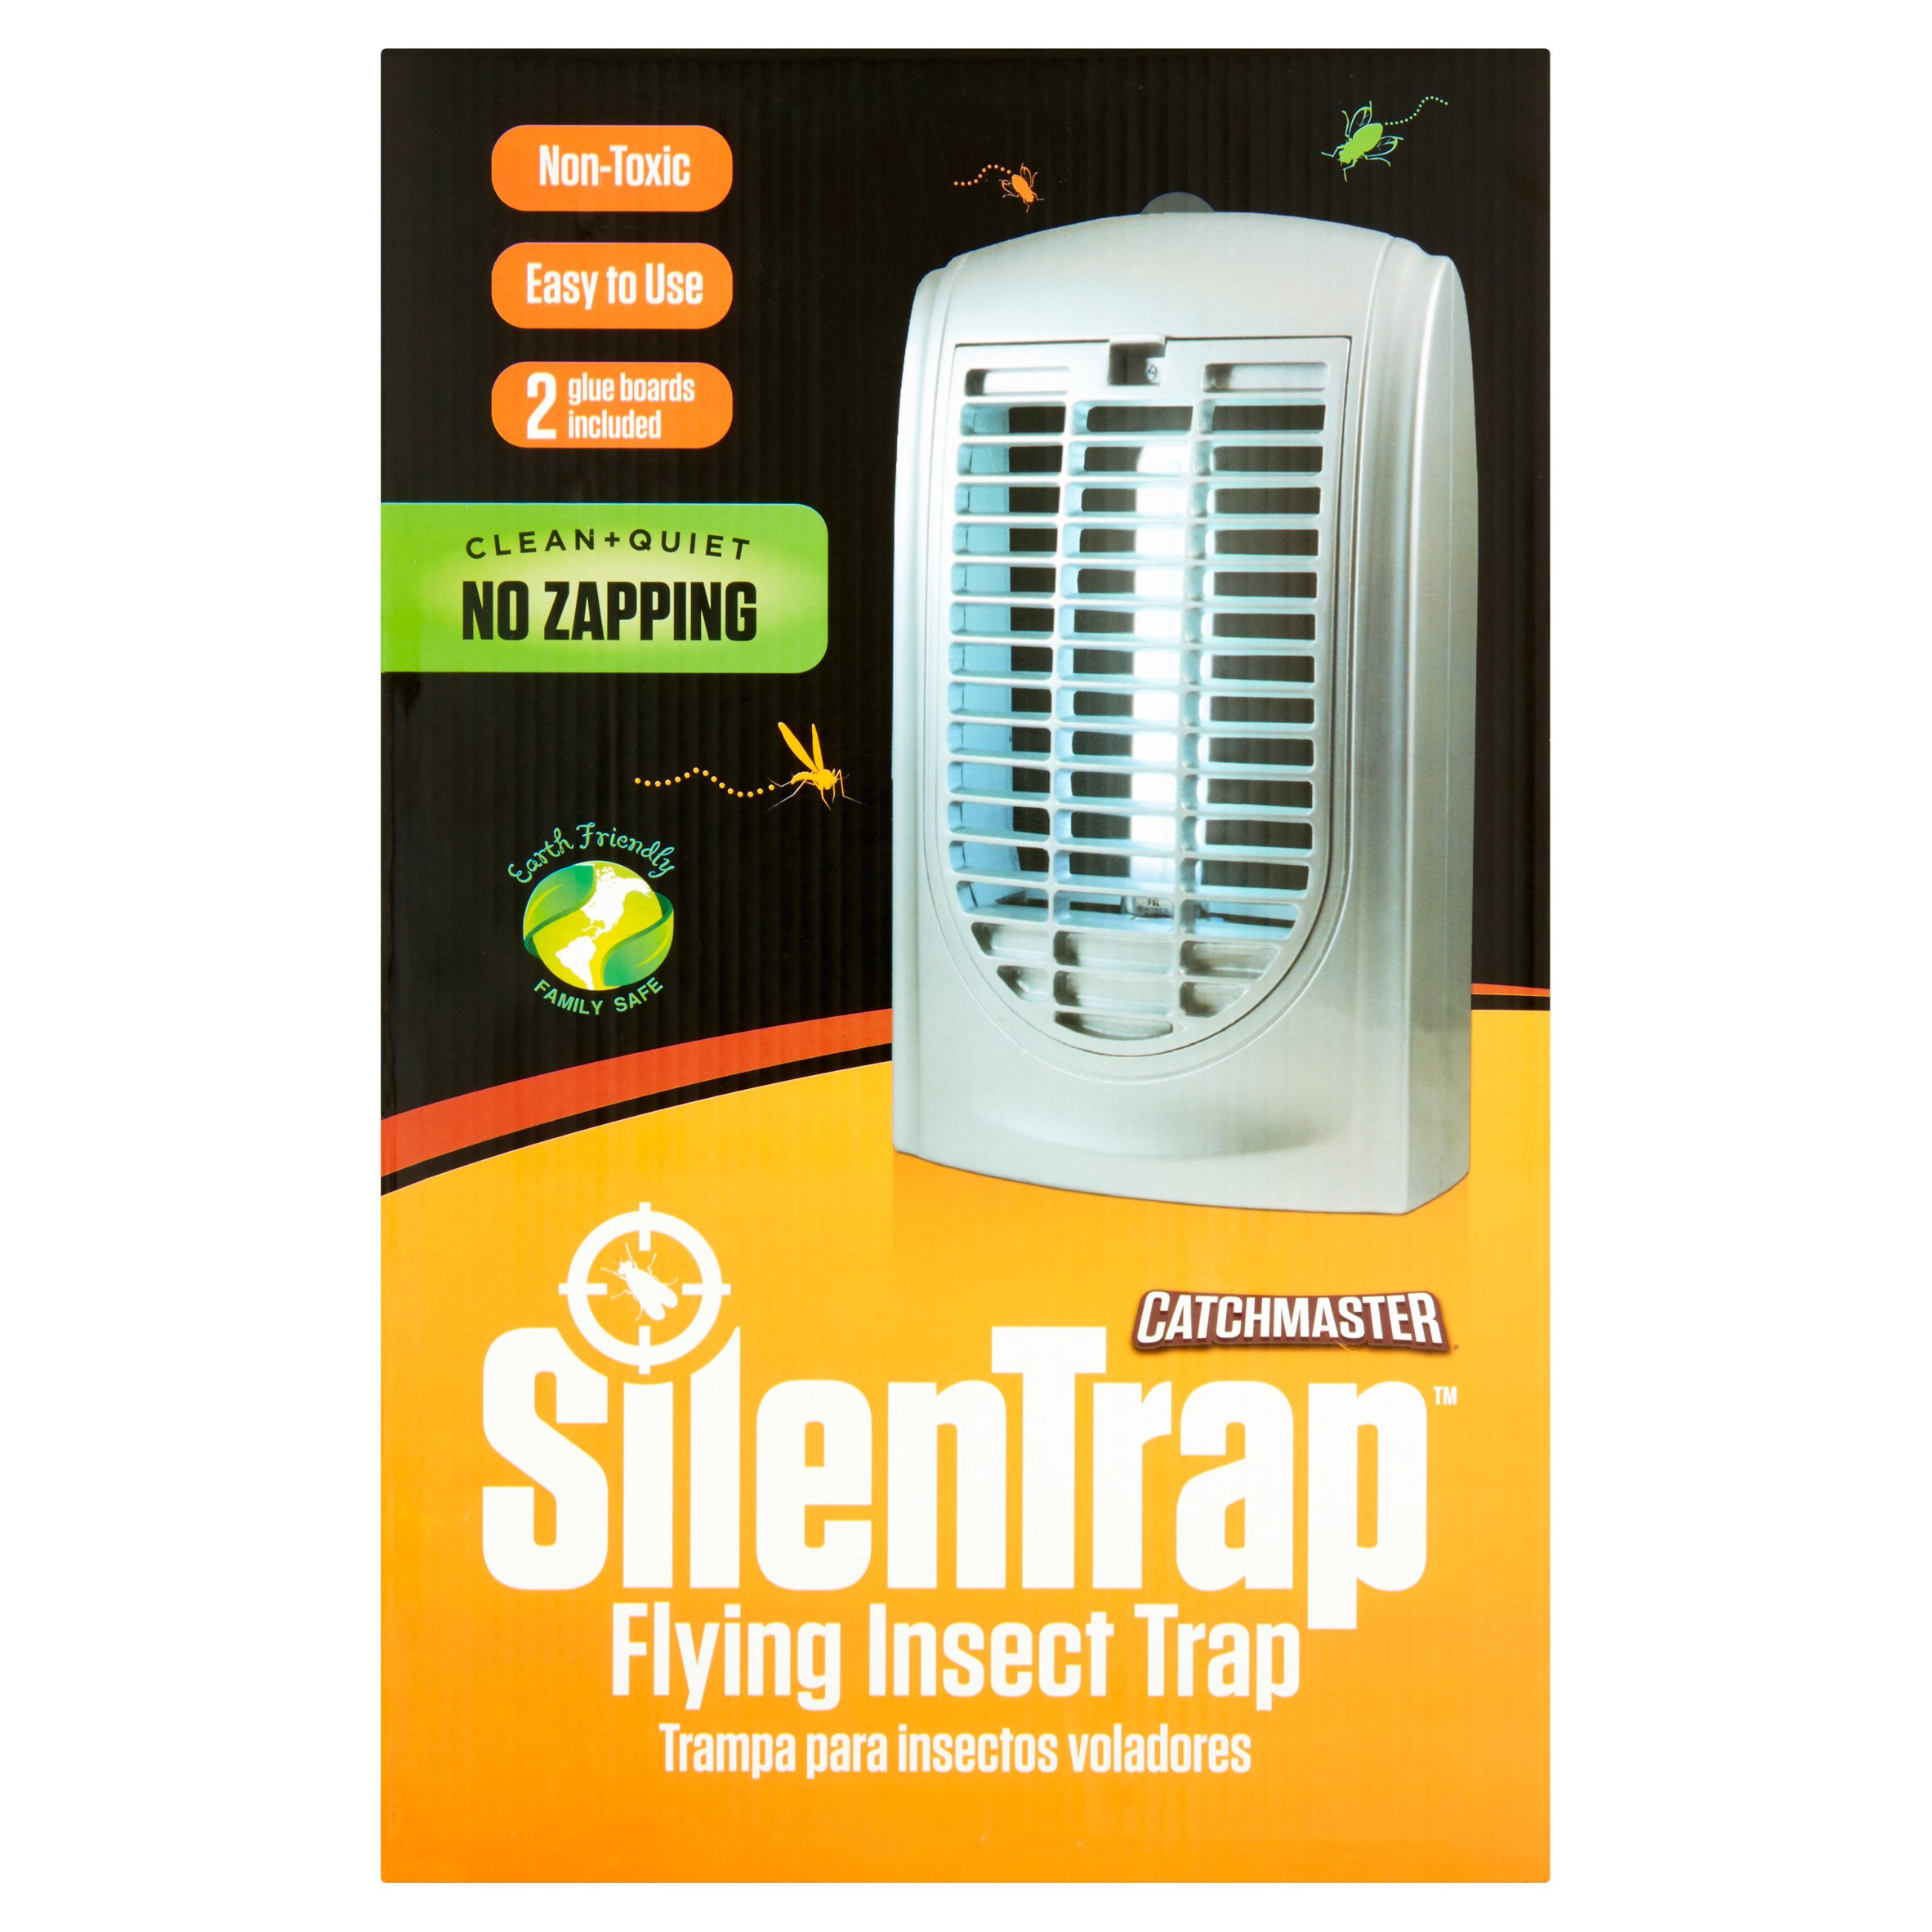 Catchmaster SilentTrap Flying Insect Trap - image 1 of 7